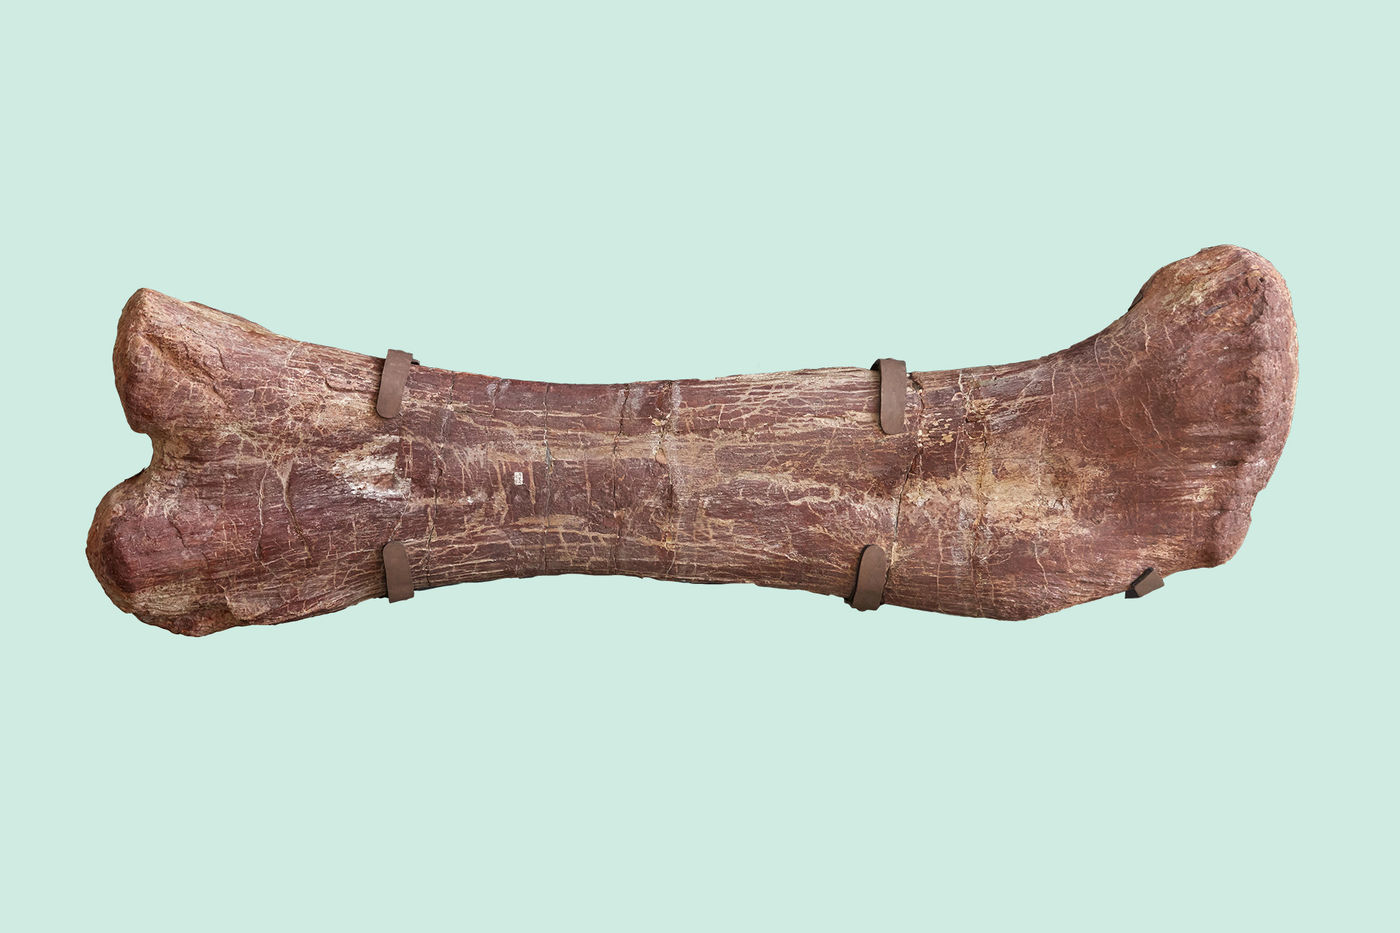 Patagotitan's fossil femur is a whopping eight feet long. The reddish color of the bone comes from the iron-rich red clay in which it was found.